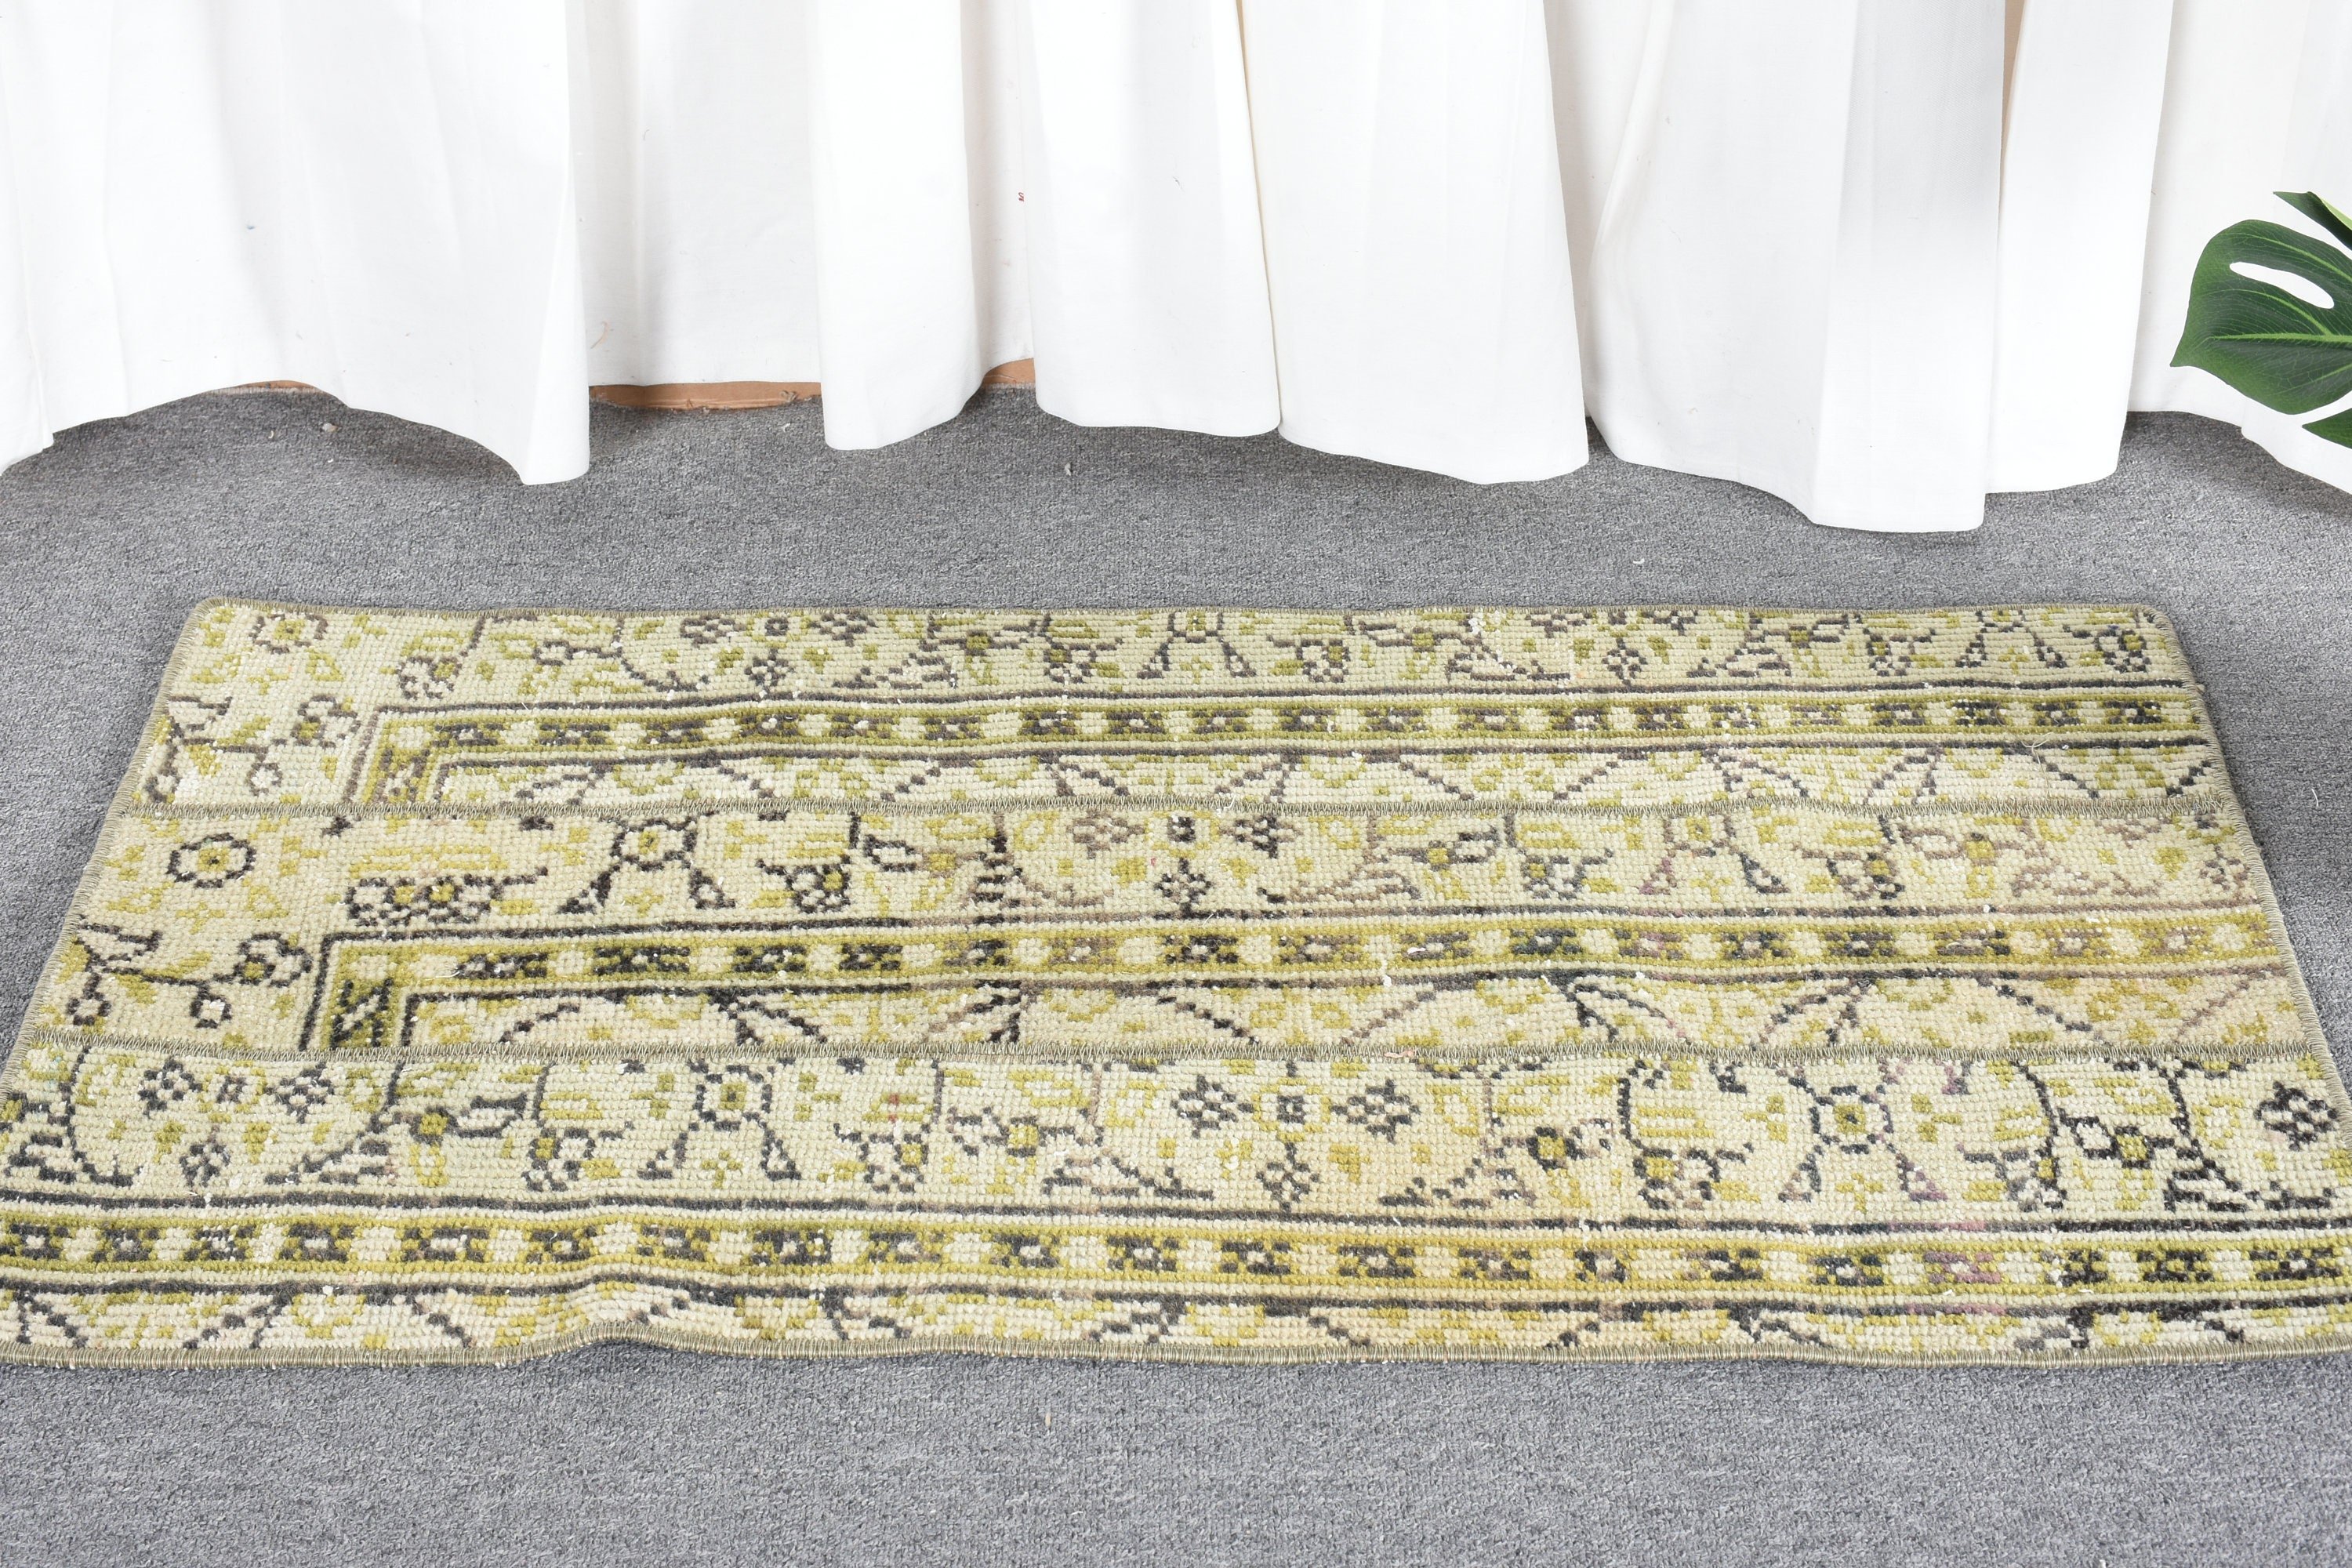 1.8x3.2 ft Small Rugs, Vintage Rug, Turkish Rugs, Green Kitchen Rug, Wool Rug, Wall Hanging Rug, Rugs for Wall Hanging